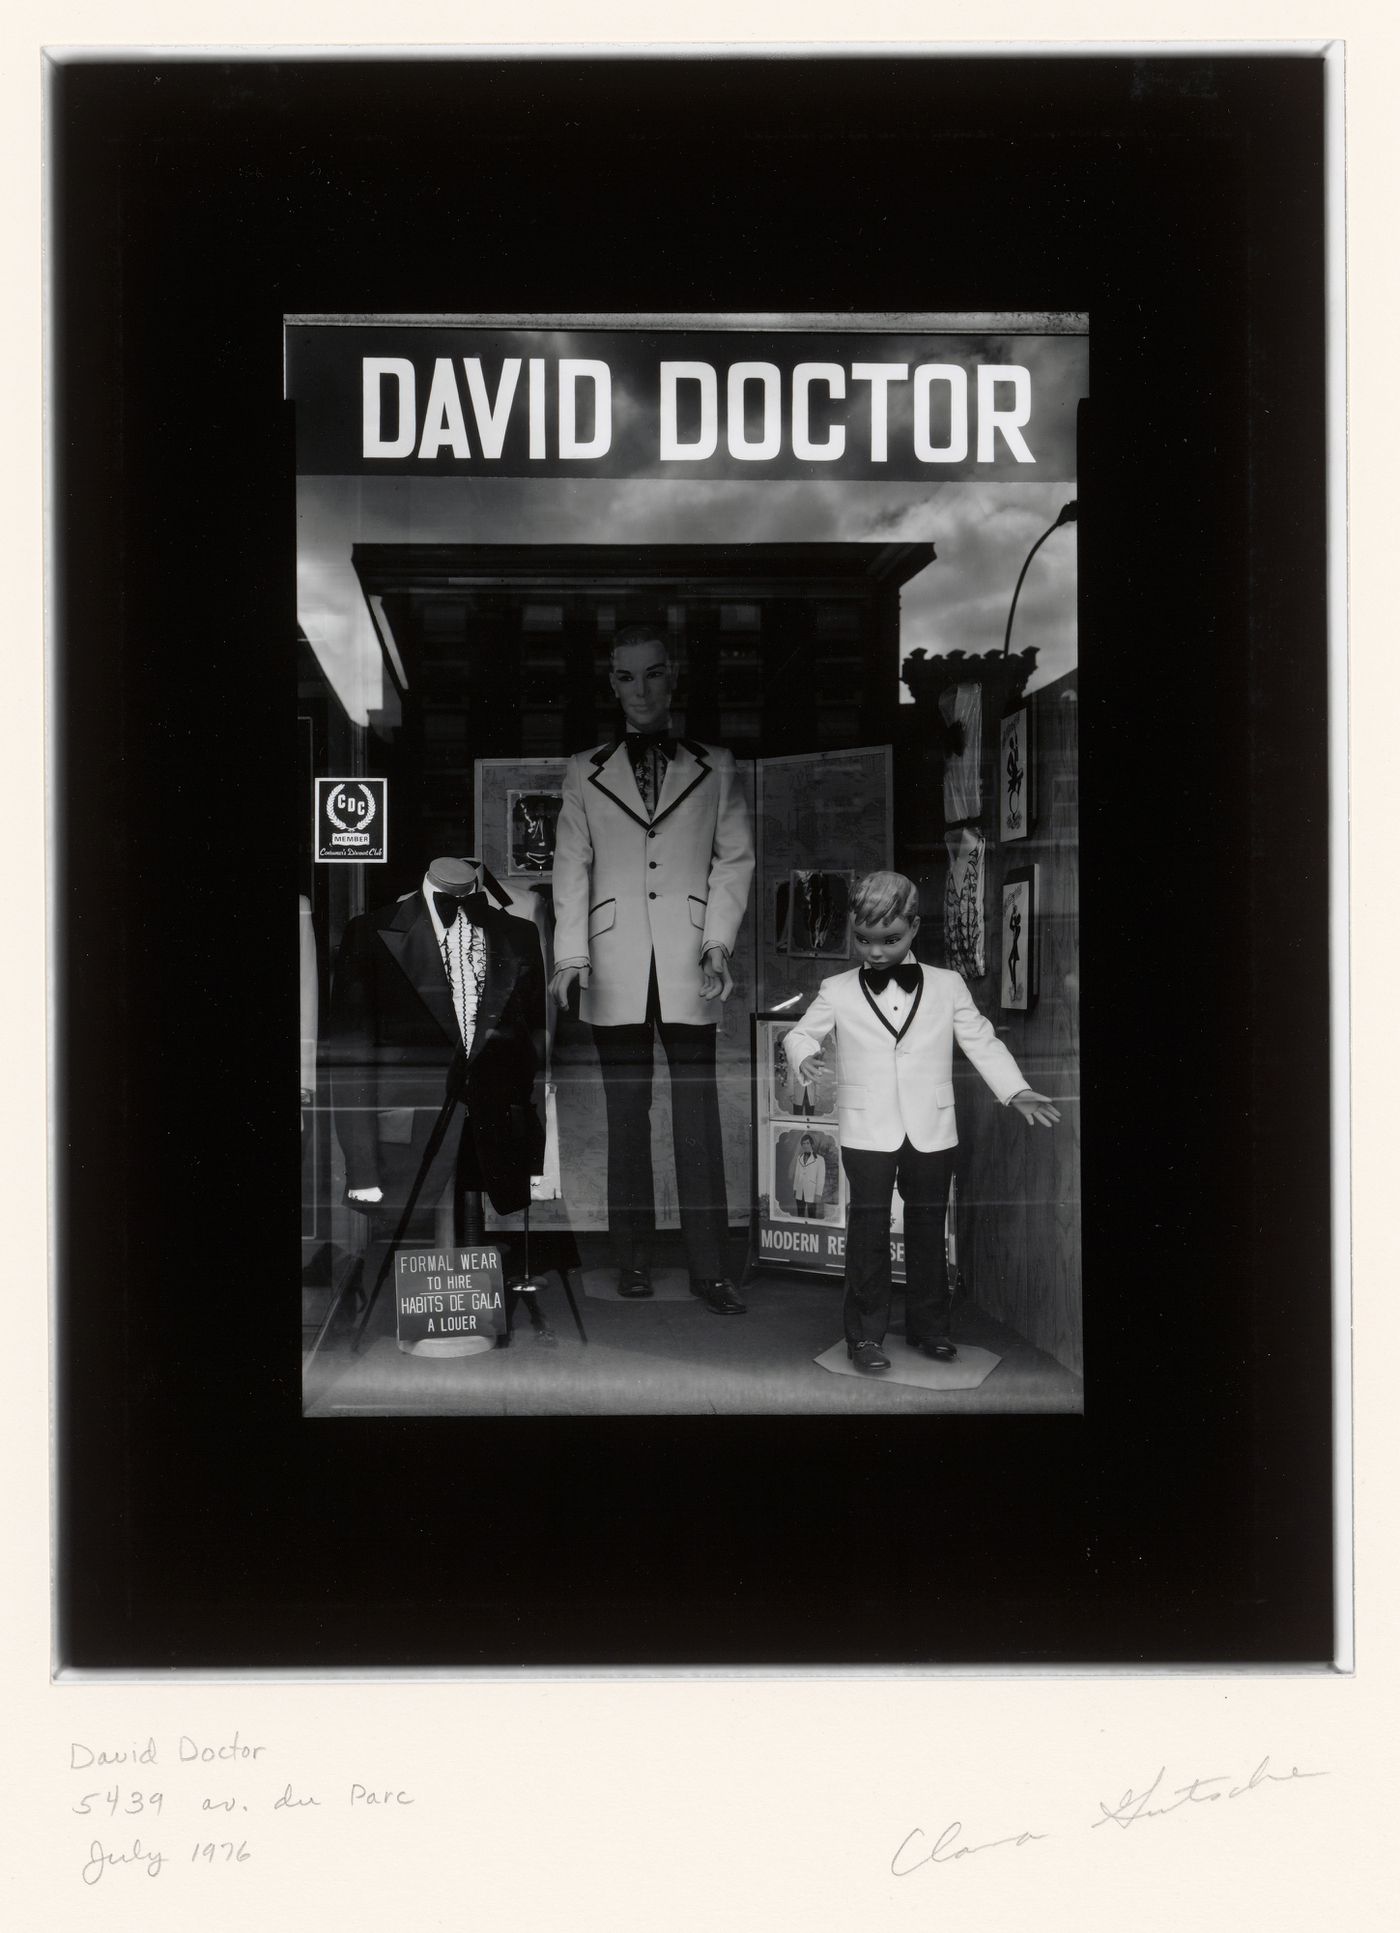 View of a display window of the David Doctor clothing store showing tuxedos and the reflection of buildings across the street, 5439 avenue du Parc, Montréal, Québec